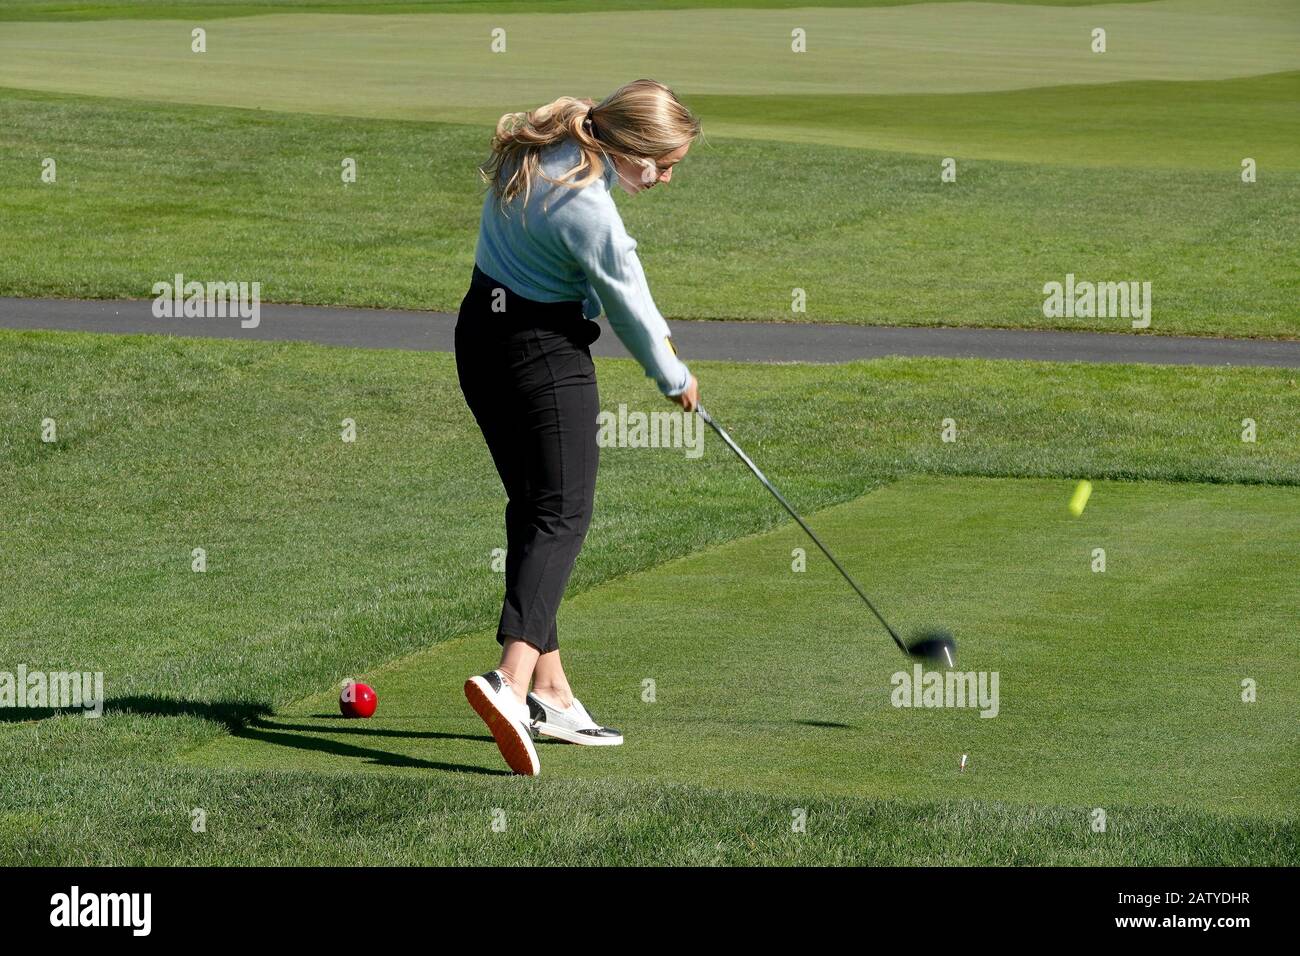 Pebble Beach, USA. 05th Feb, 2020. Monterey, California, USA February 5th 2020 Kira Dixon (Miss America 2015) tees off at the 3M Celebrity Challenge for their various charities prior to the AT&T Pro-Am PGA Golf event at Pebble Beach Credit: Motofoto/Alamy Live News Stock Photo